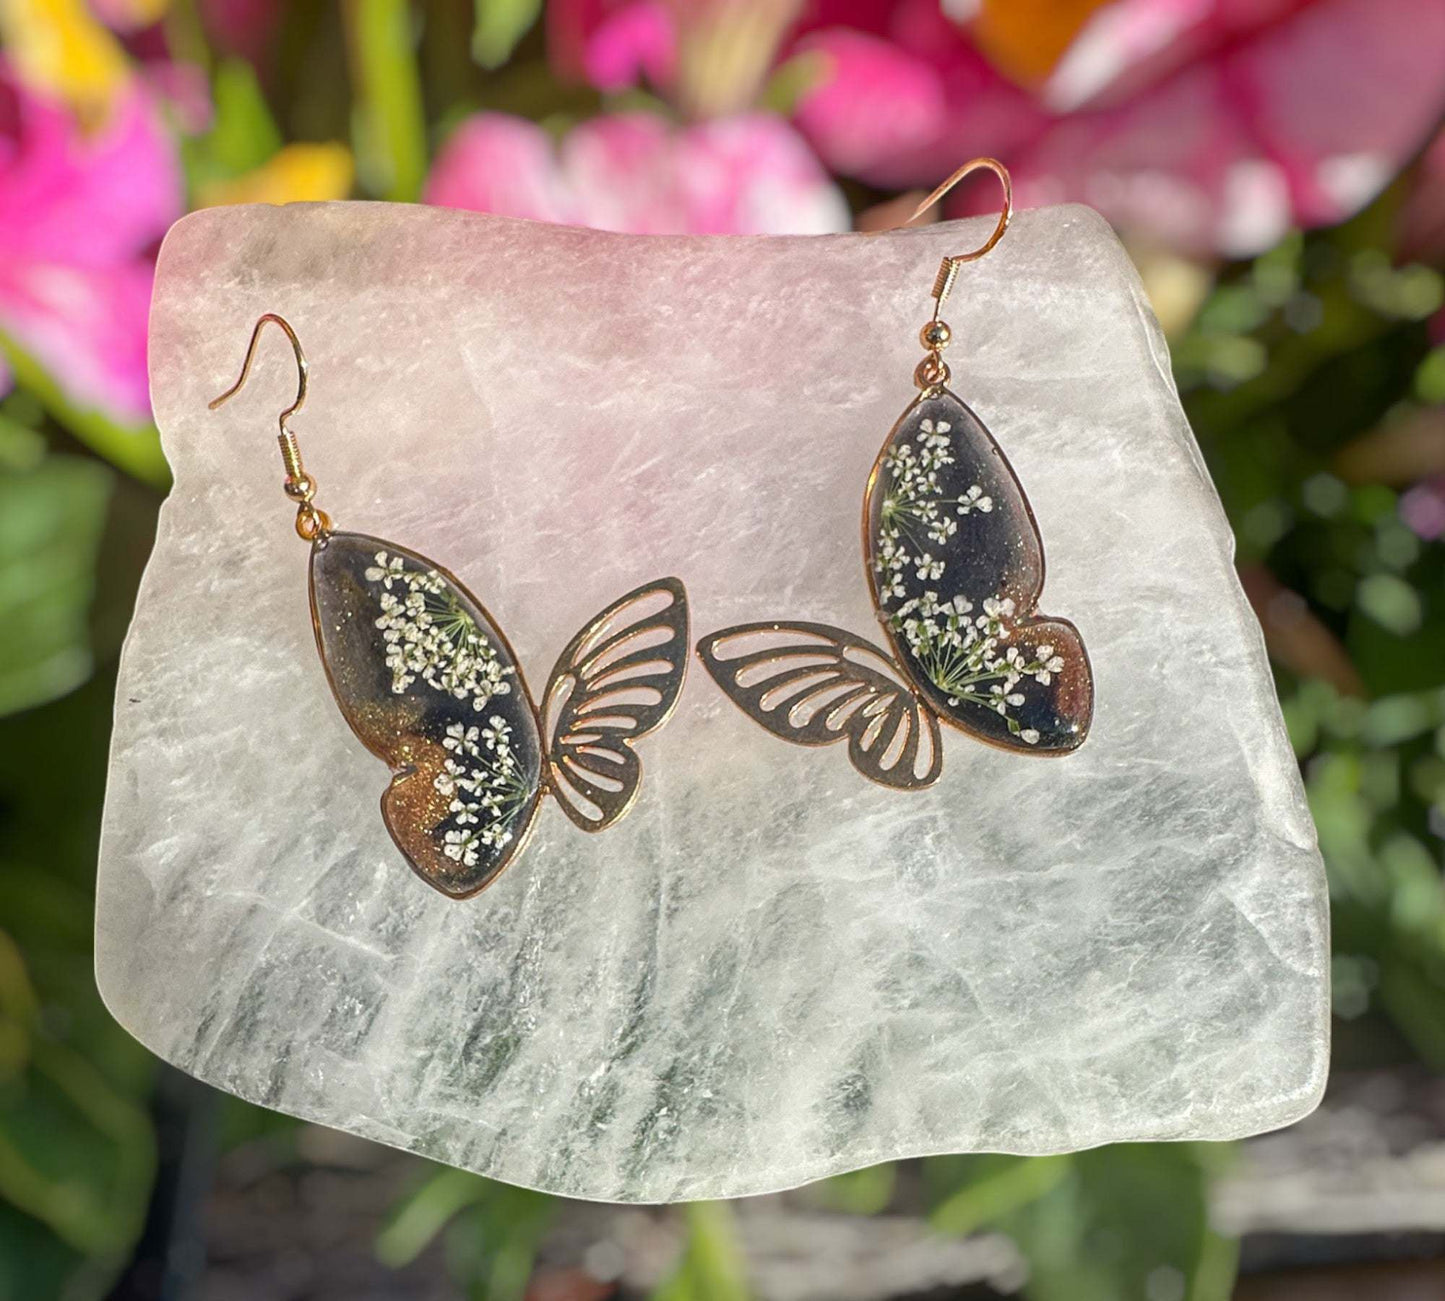 Earring Midnight Blossom Butterfly Handmade Pressed Flower Accessory